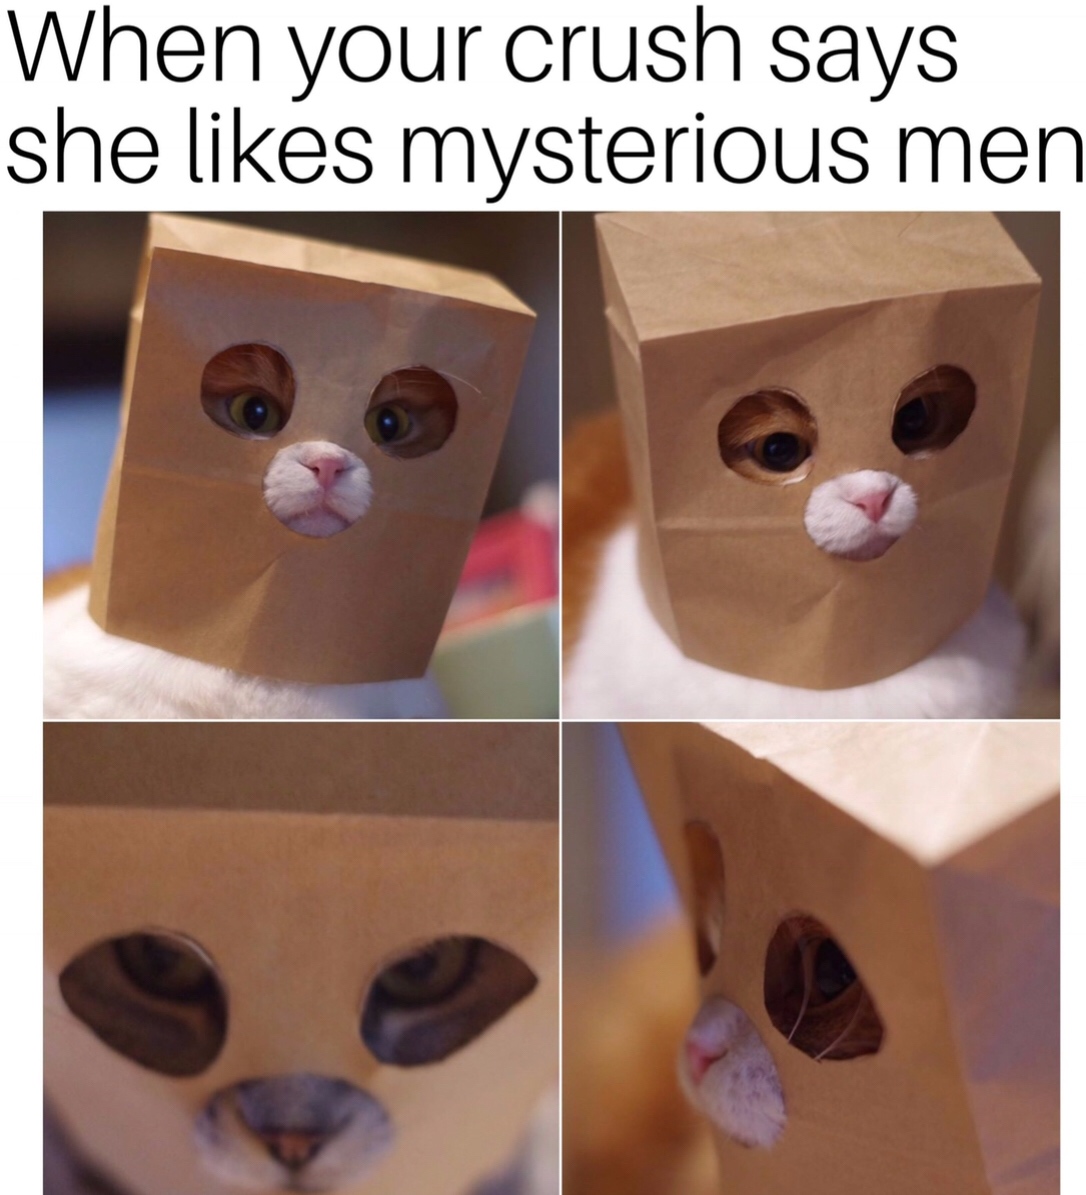 memes - no one cared who i was until - When your crush says she mysterious men